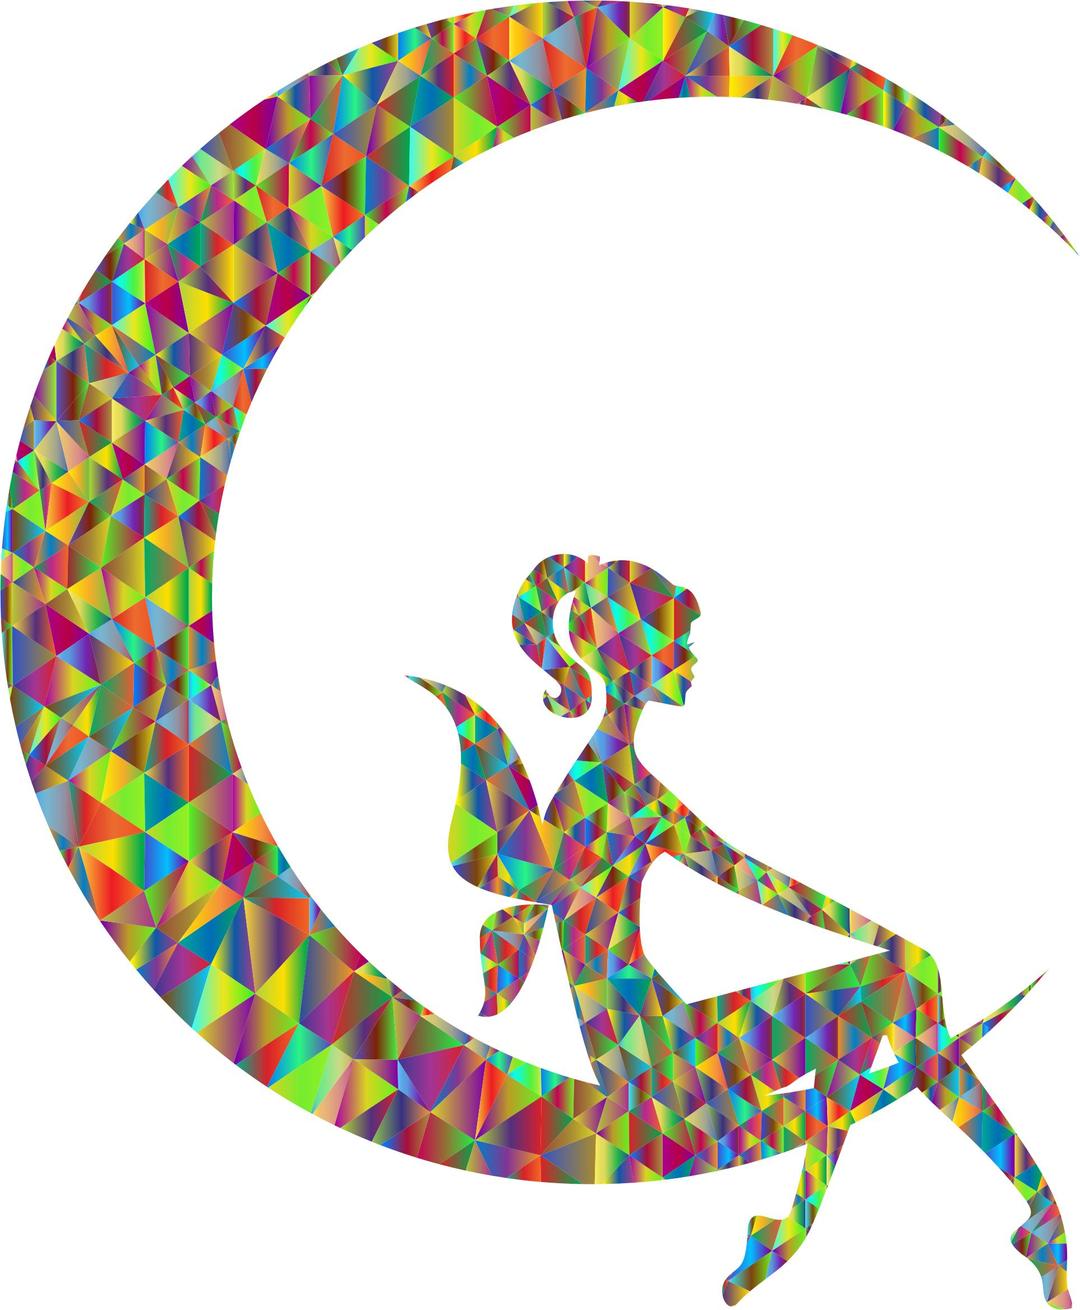 Polychromatic Low Poly Fairy Relaxing On The Crescent Moon II png transparent